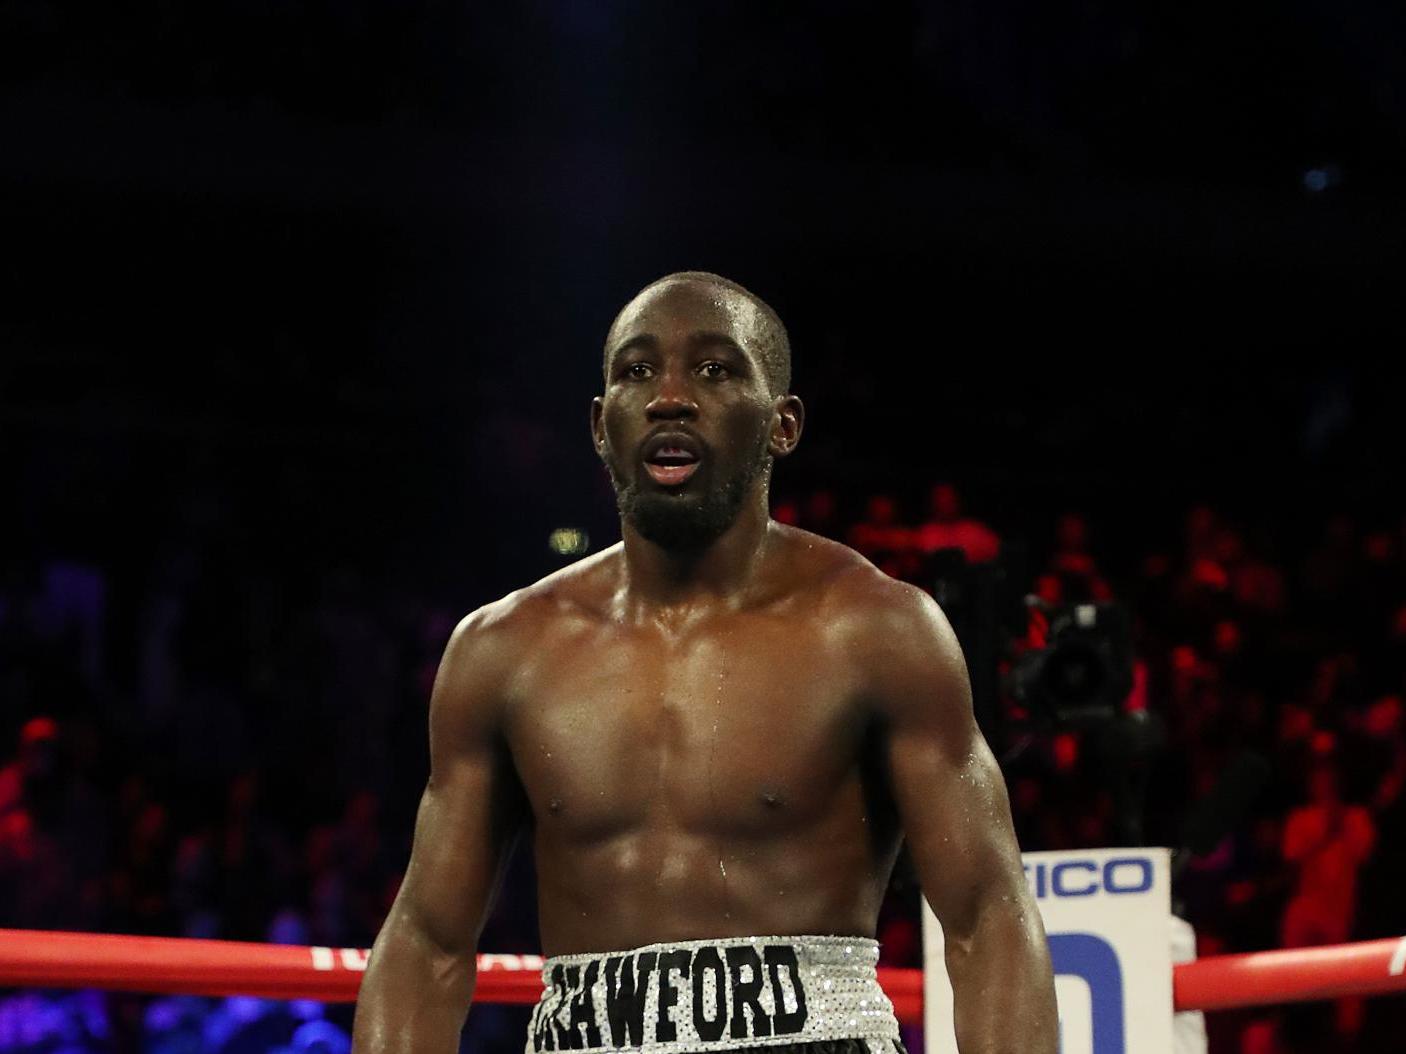 Terence Crawford has vowed to knock out Errol Spence and make him cry